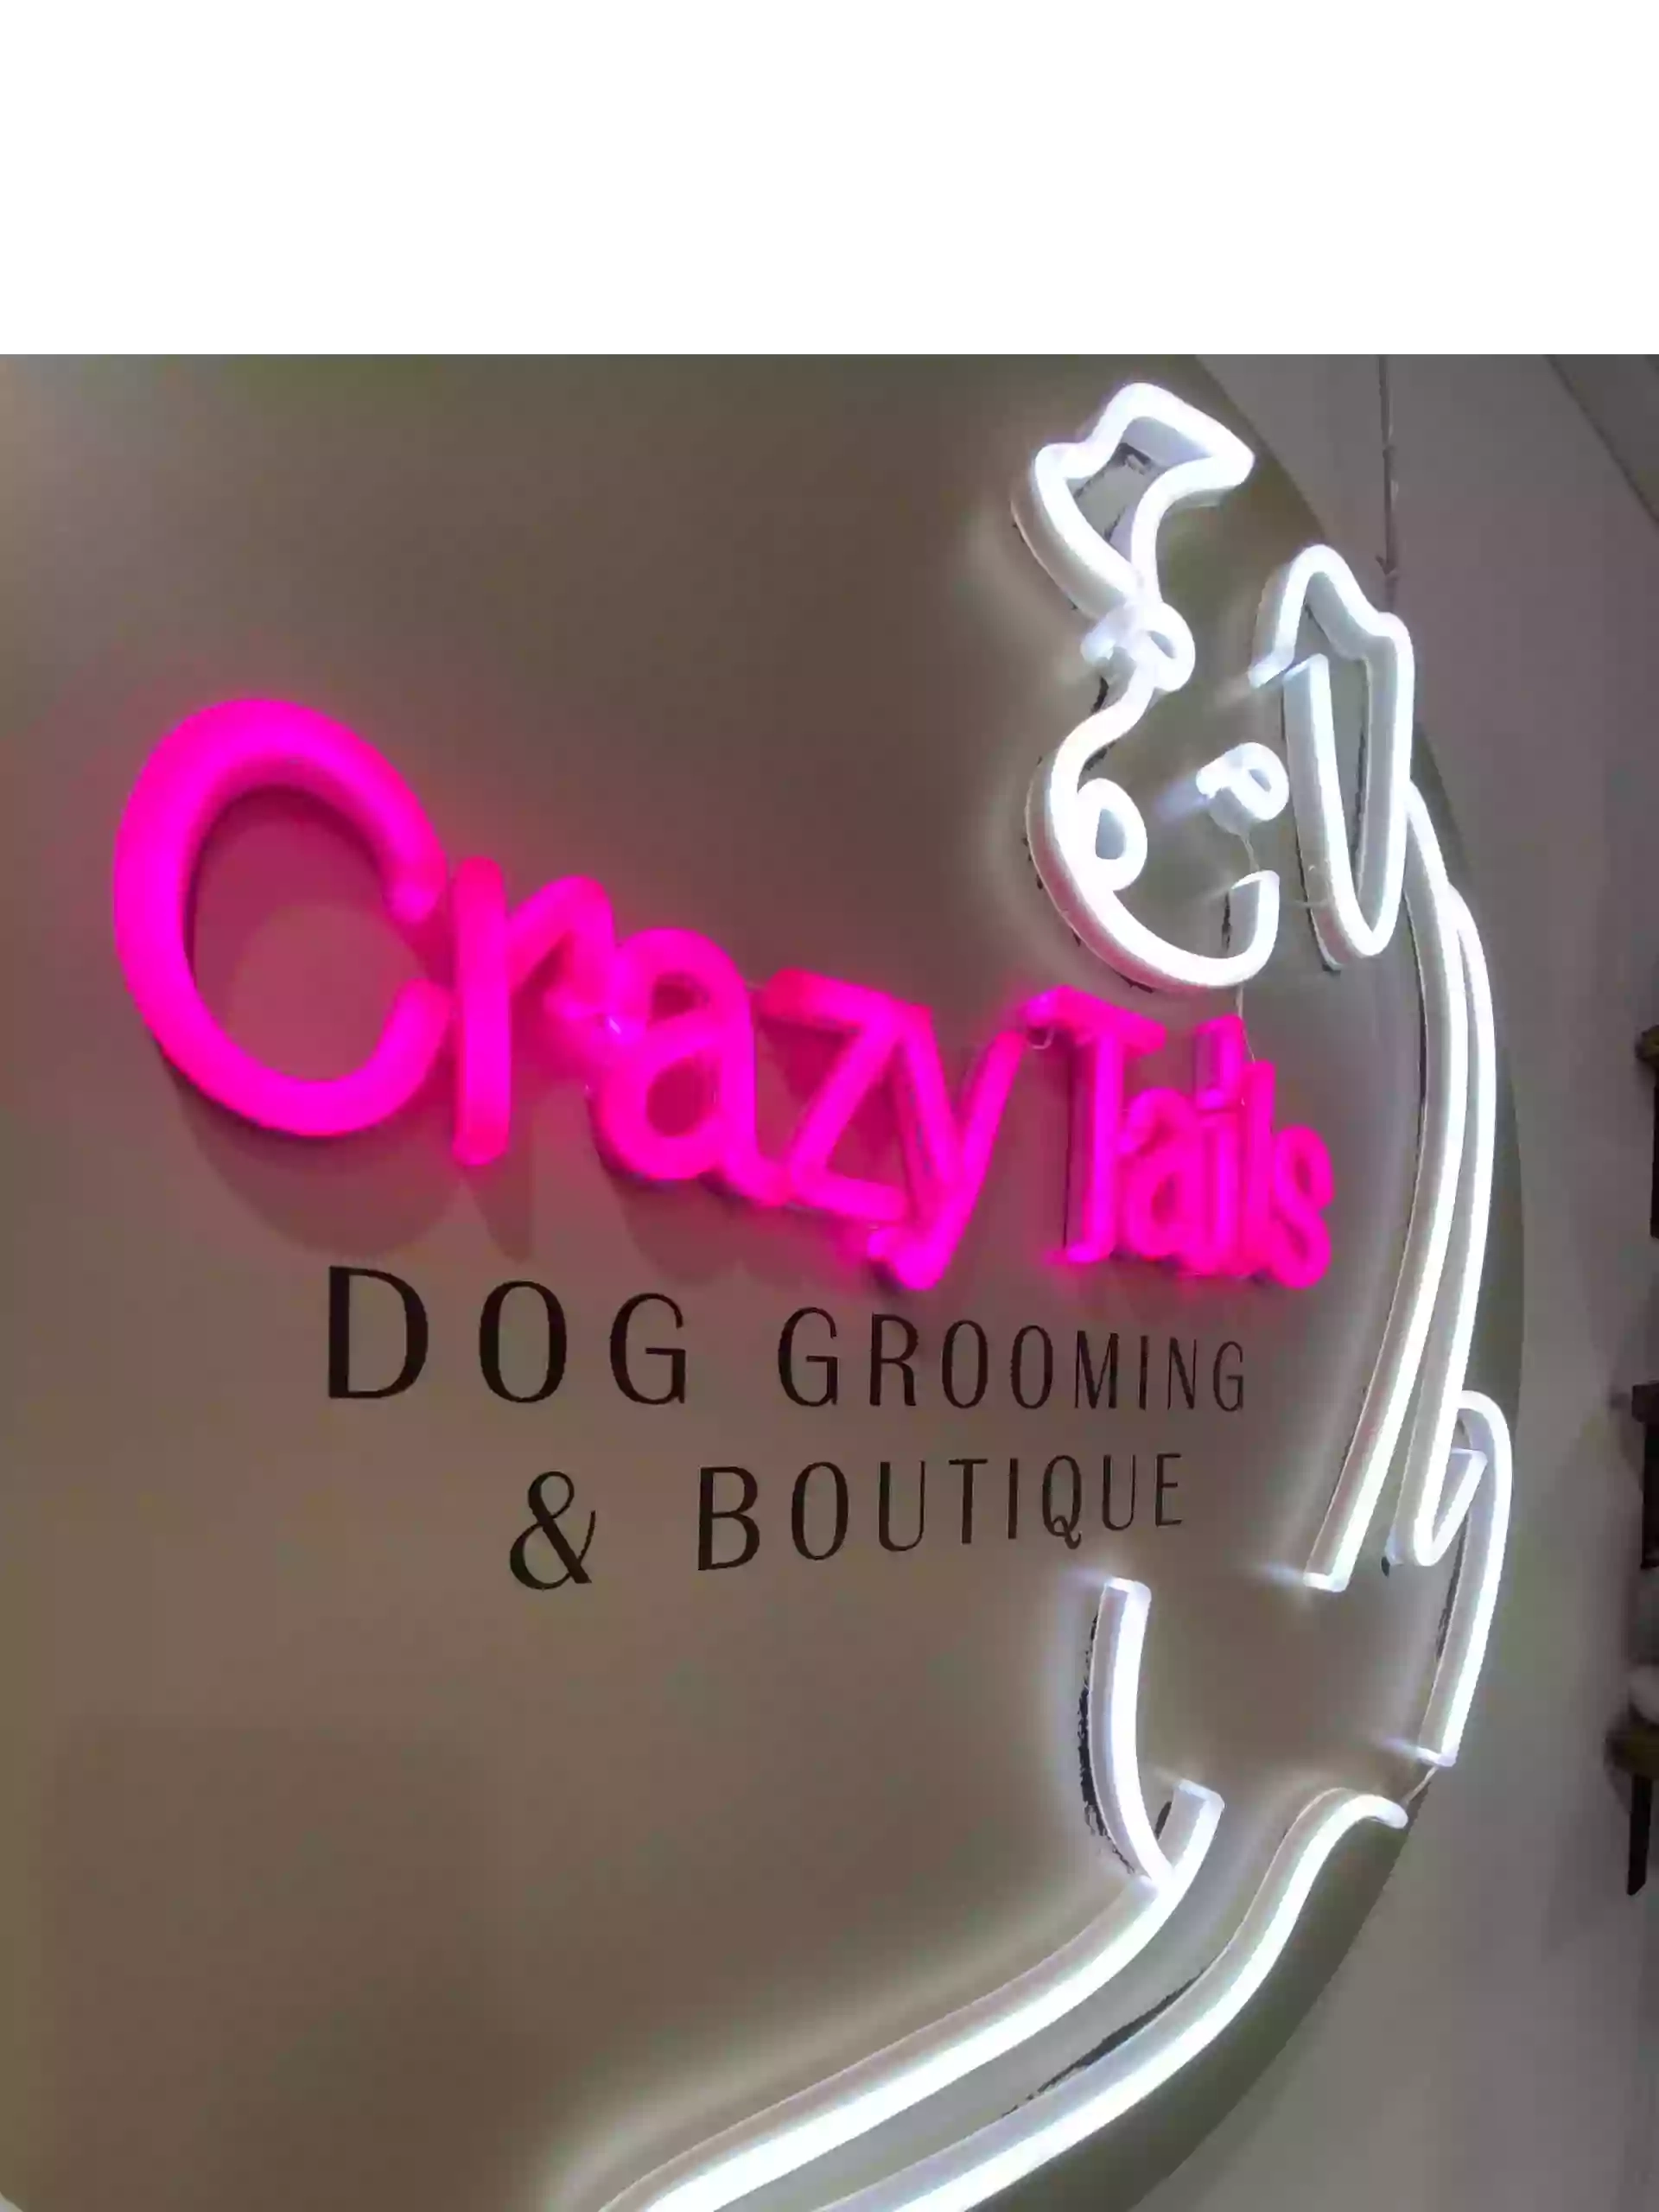 Crazy Tails Dog Grooming & Boutique